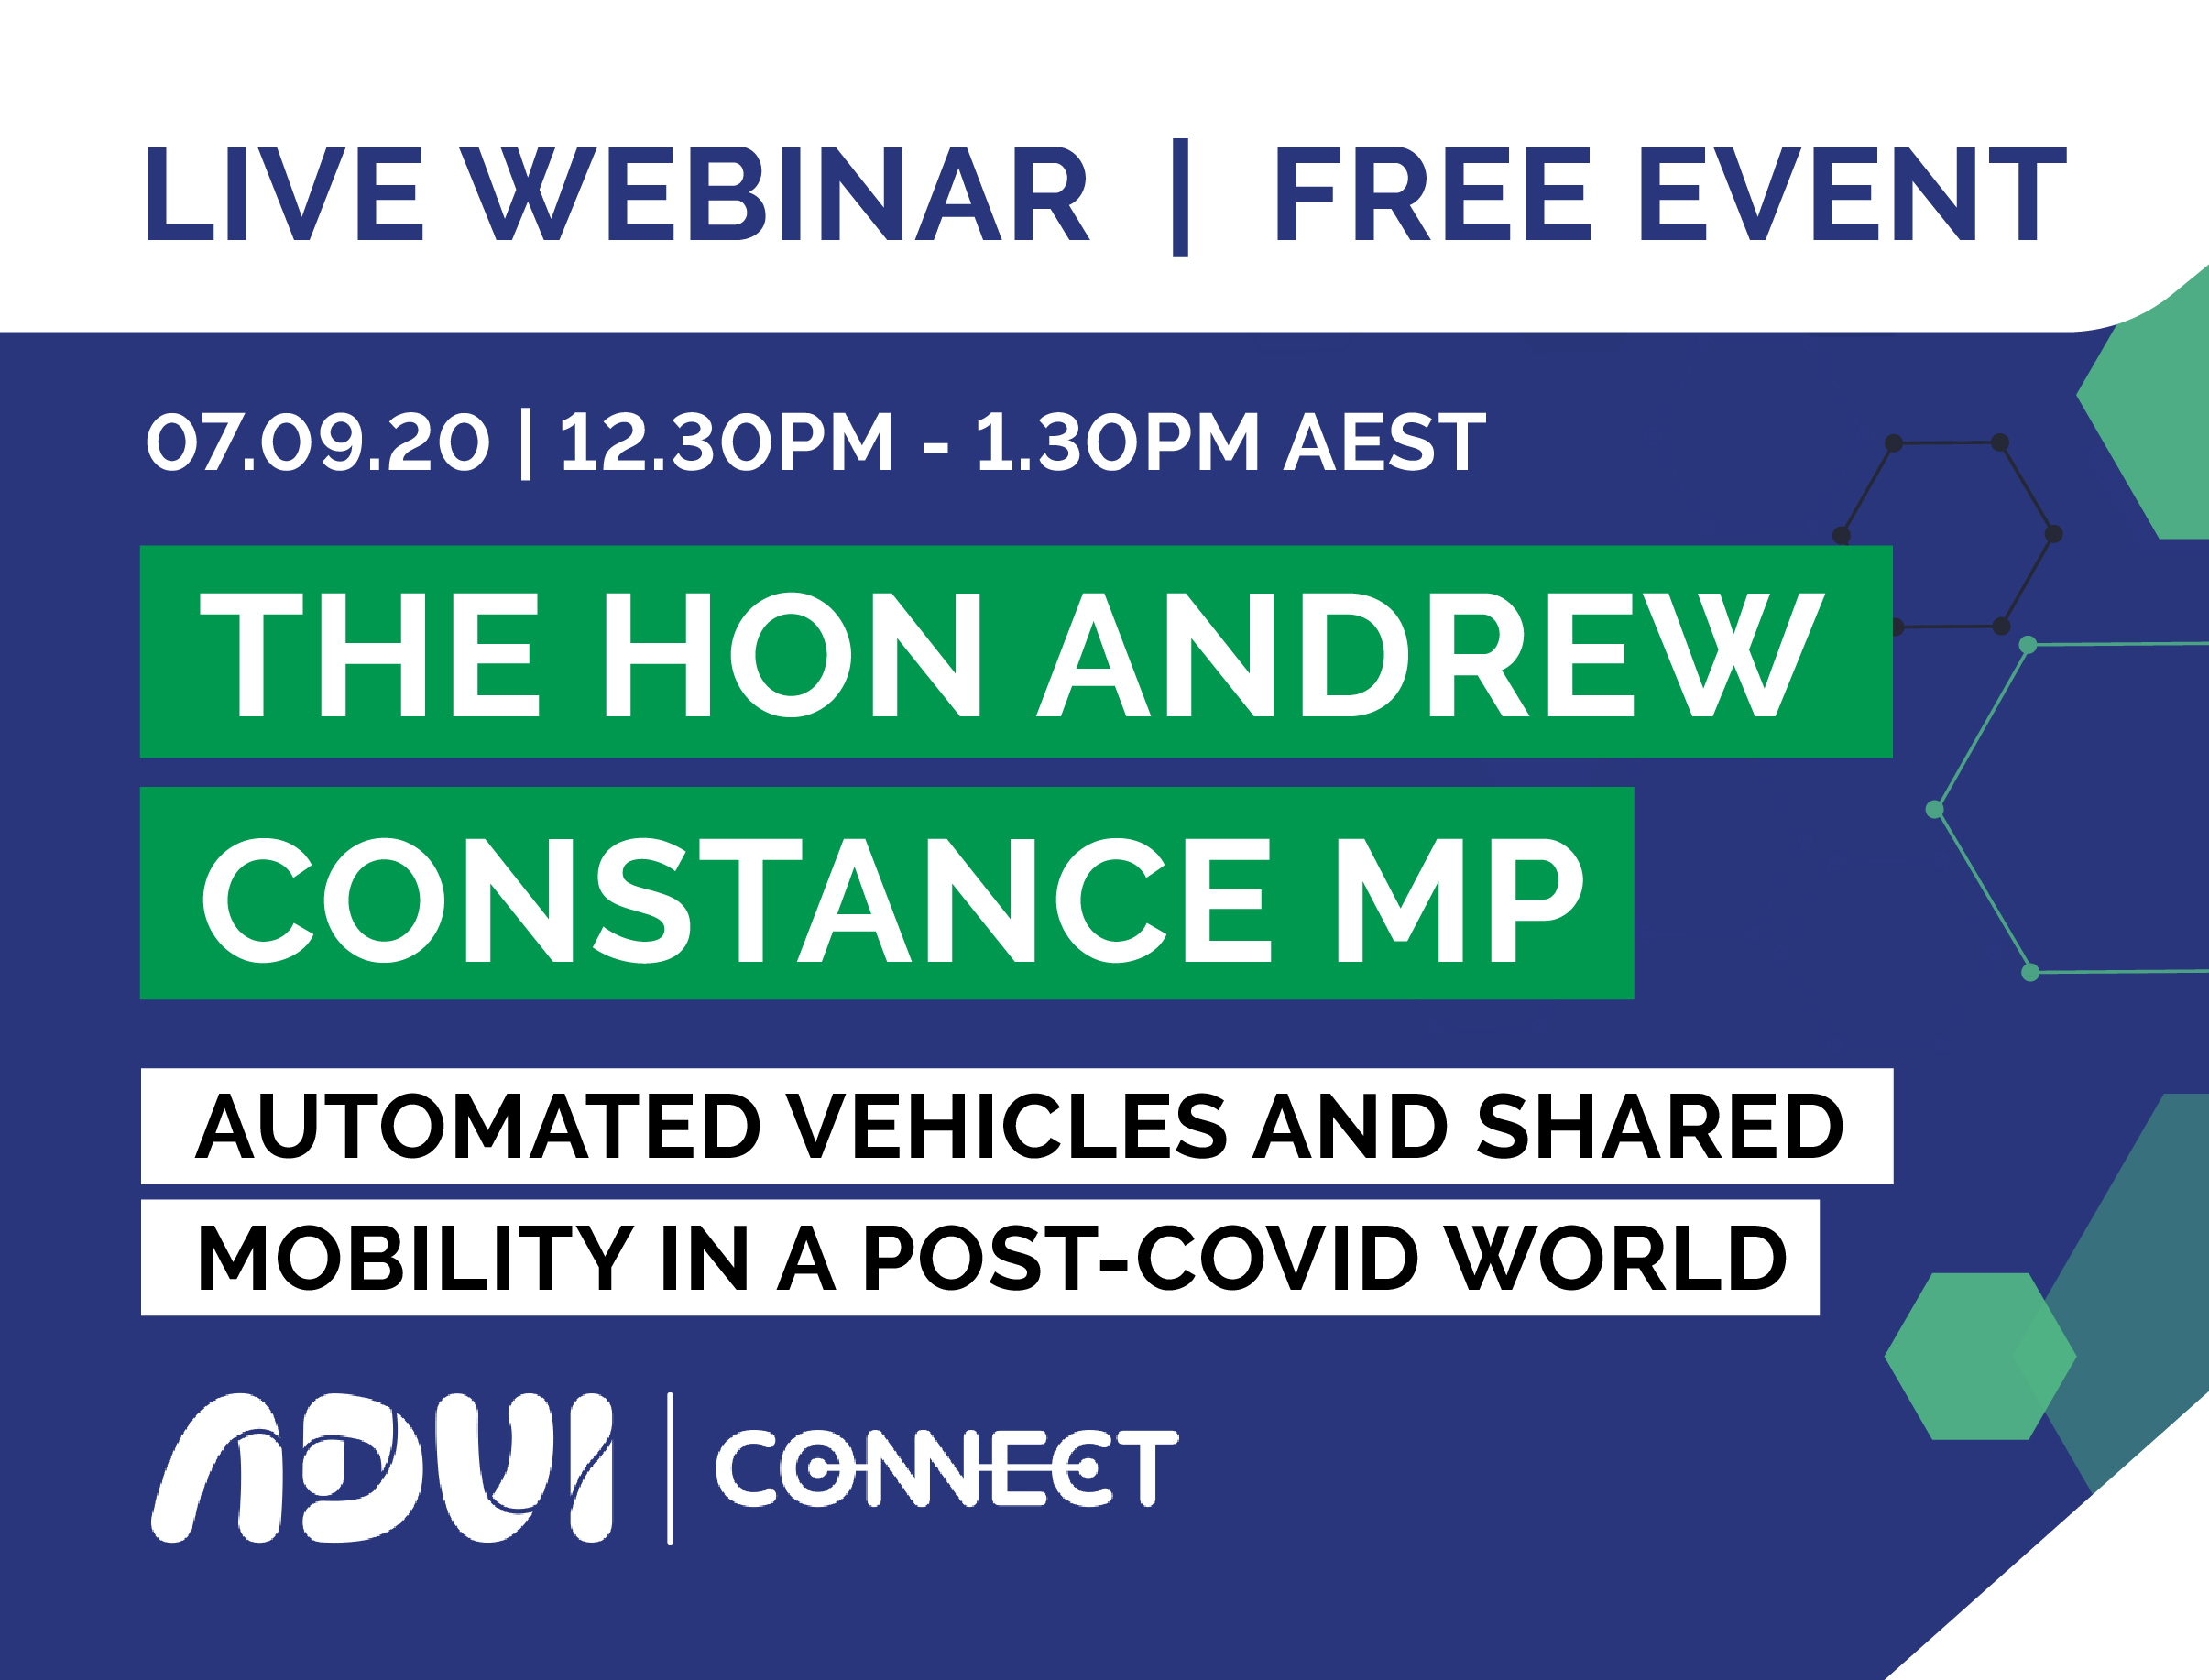 ADVI Webinar and Q&A with the Hon Andrew Constance MP and Rita Excell